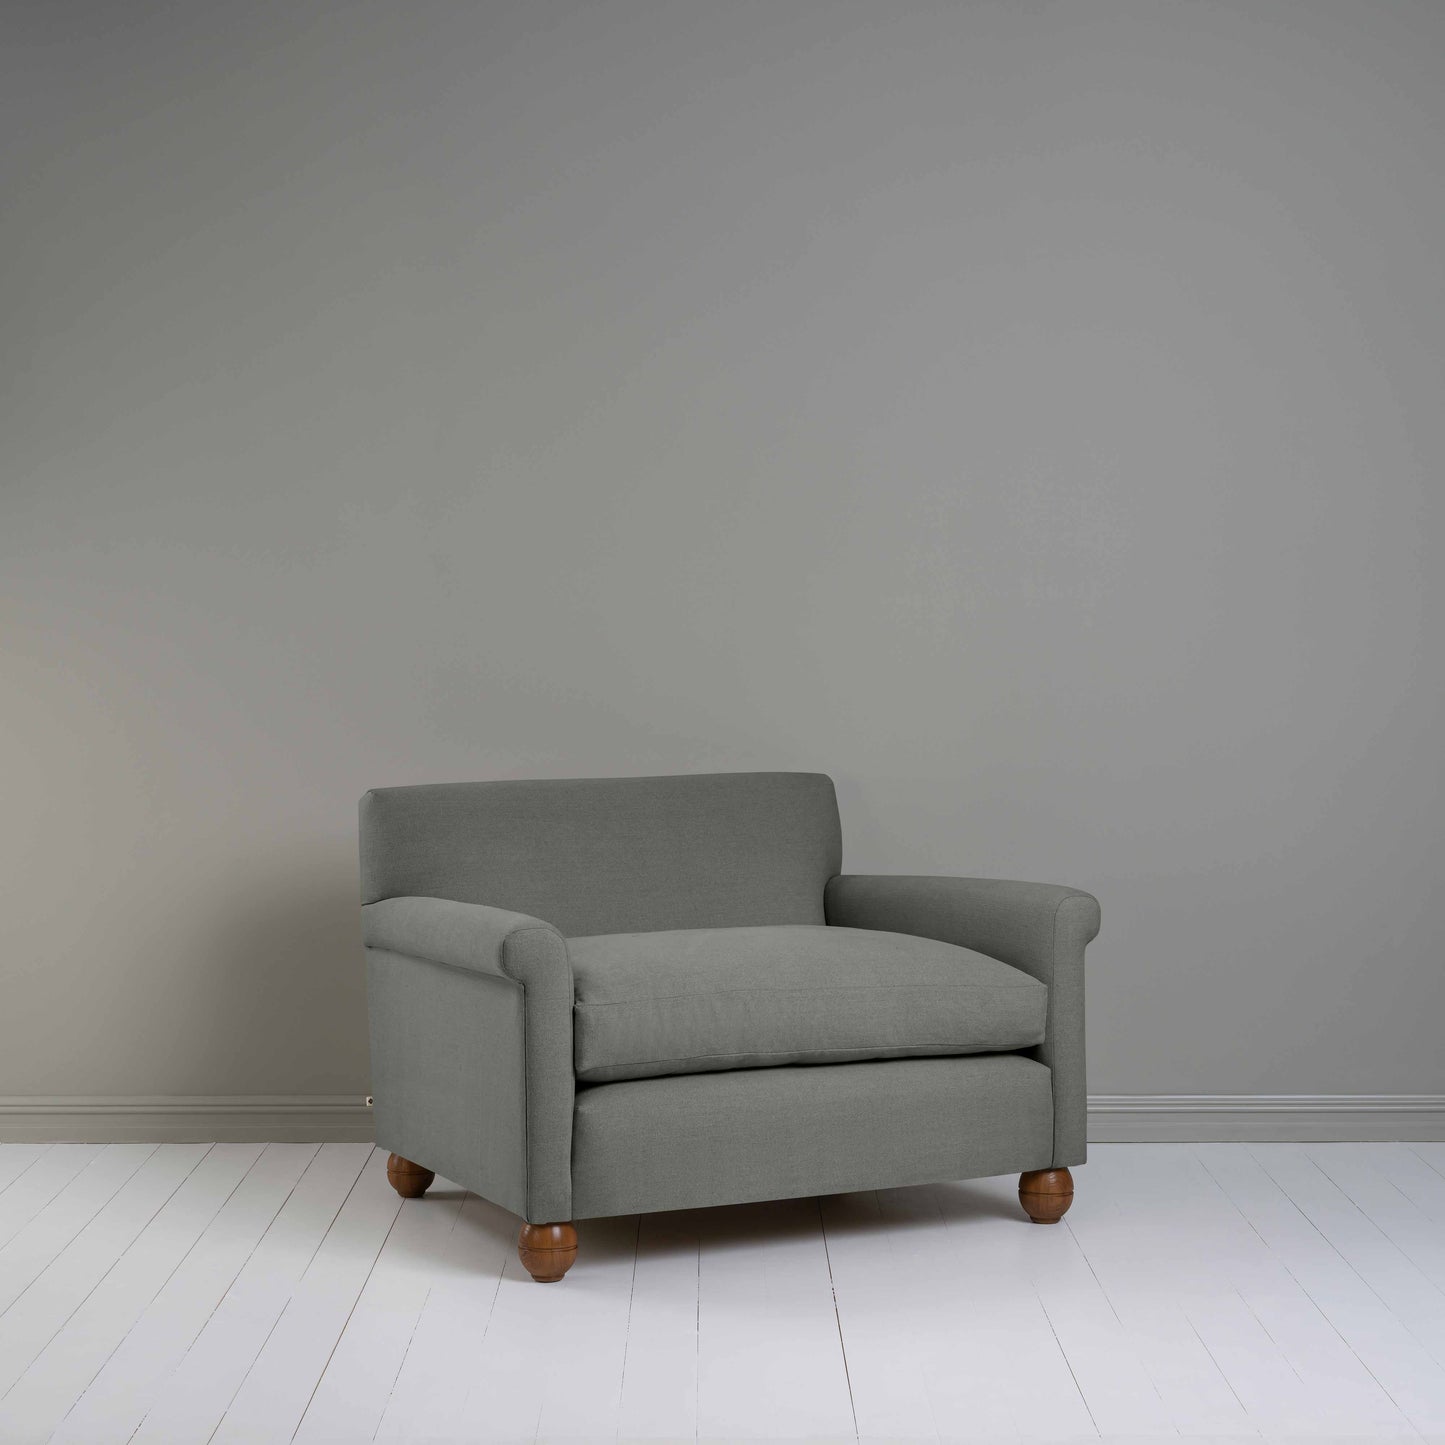 Idler Love Seat in Laidback Linen Shadow